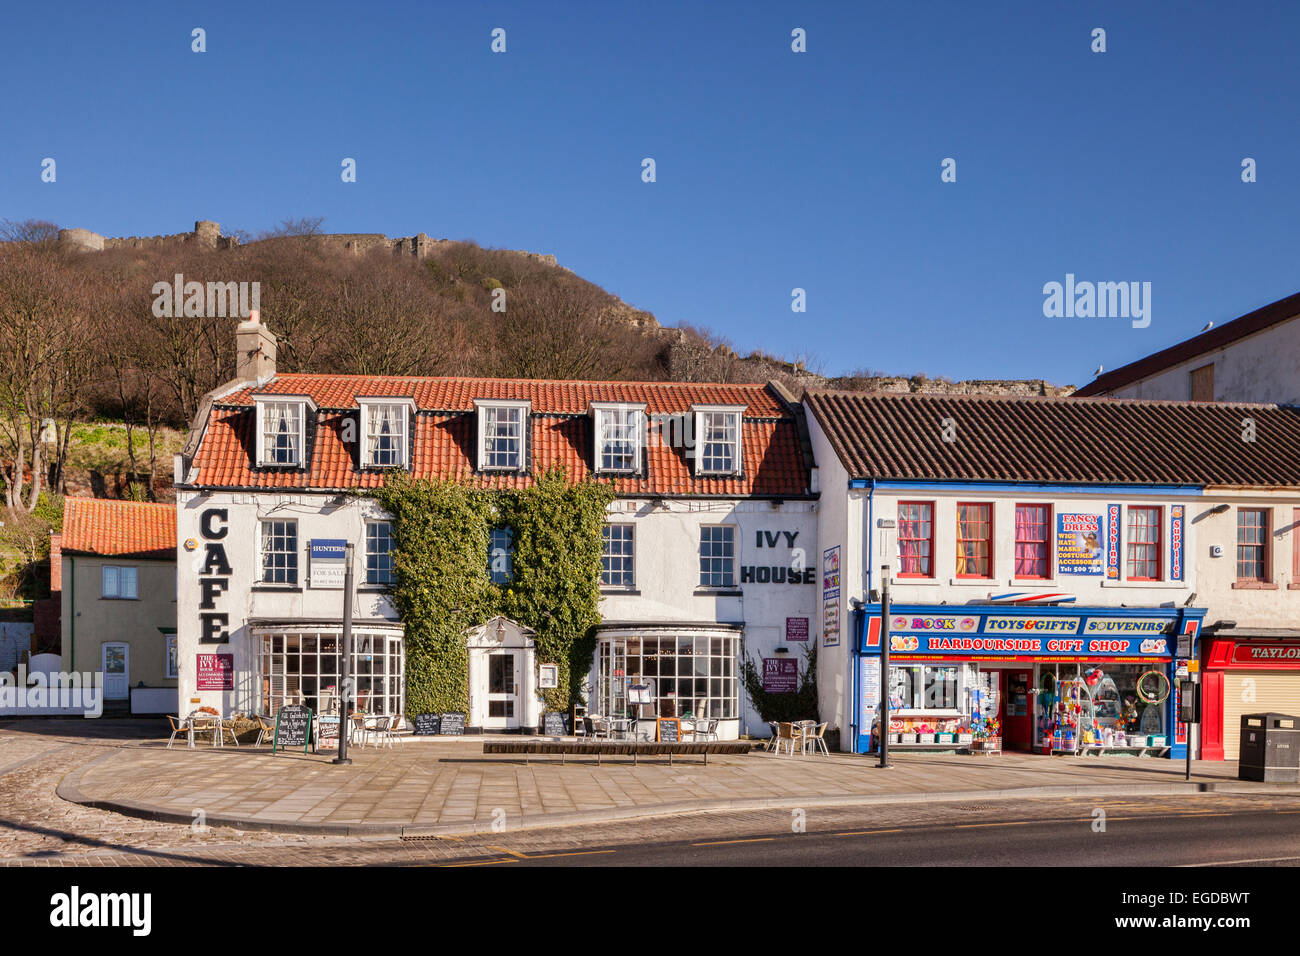 Cafe and gift shop along the seafront at Scarborough, North Yorkshire, on a sunny winter day, with Scarborough Castle on the hil Stock Photo